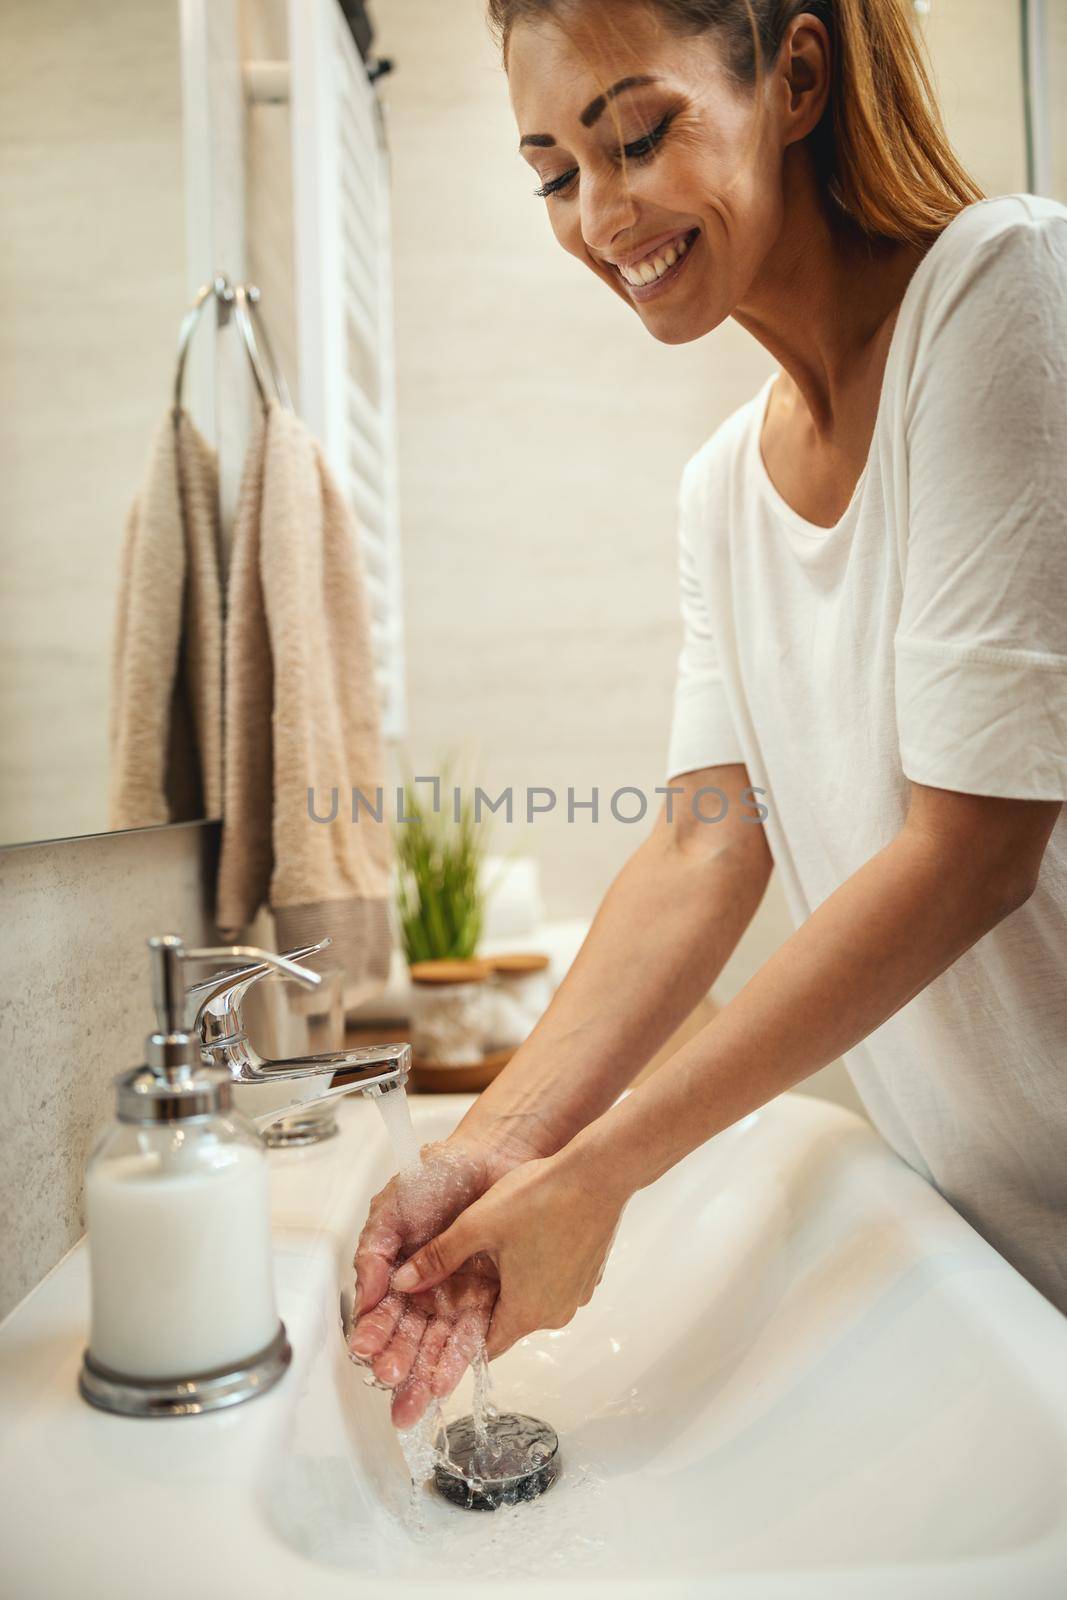 Smiling woman washing her hands with soap to prevent Coronavirus.